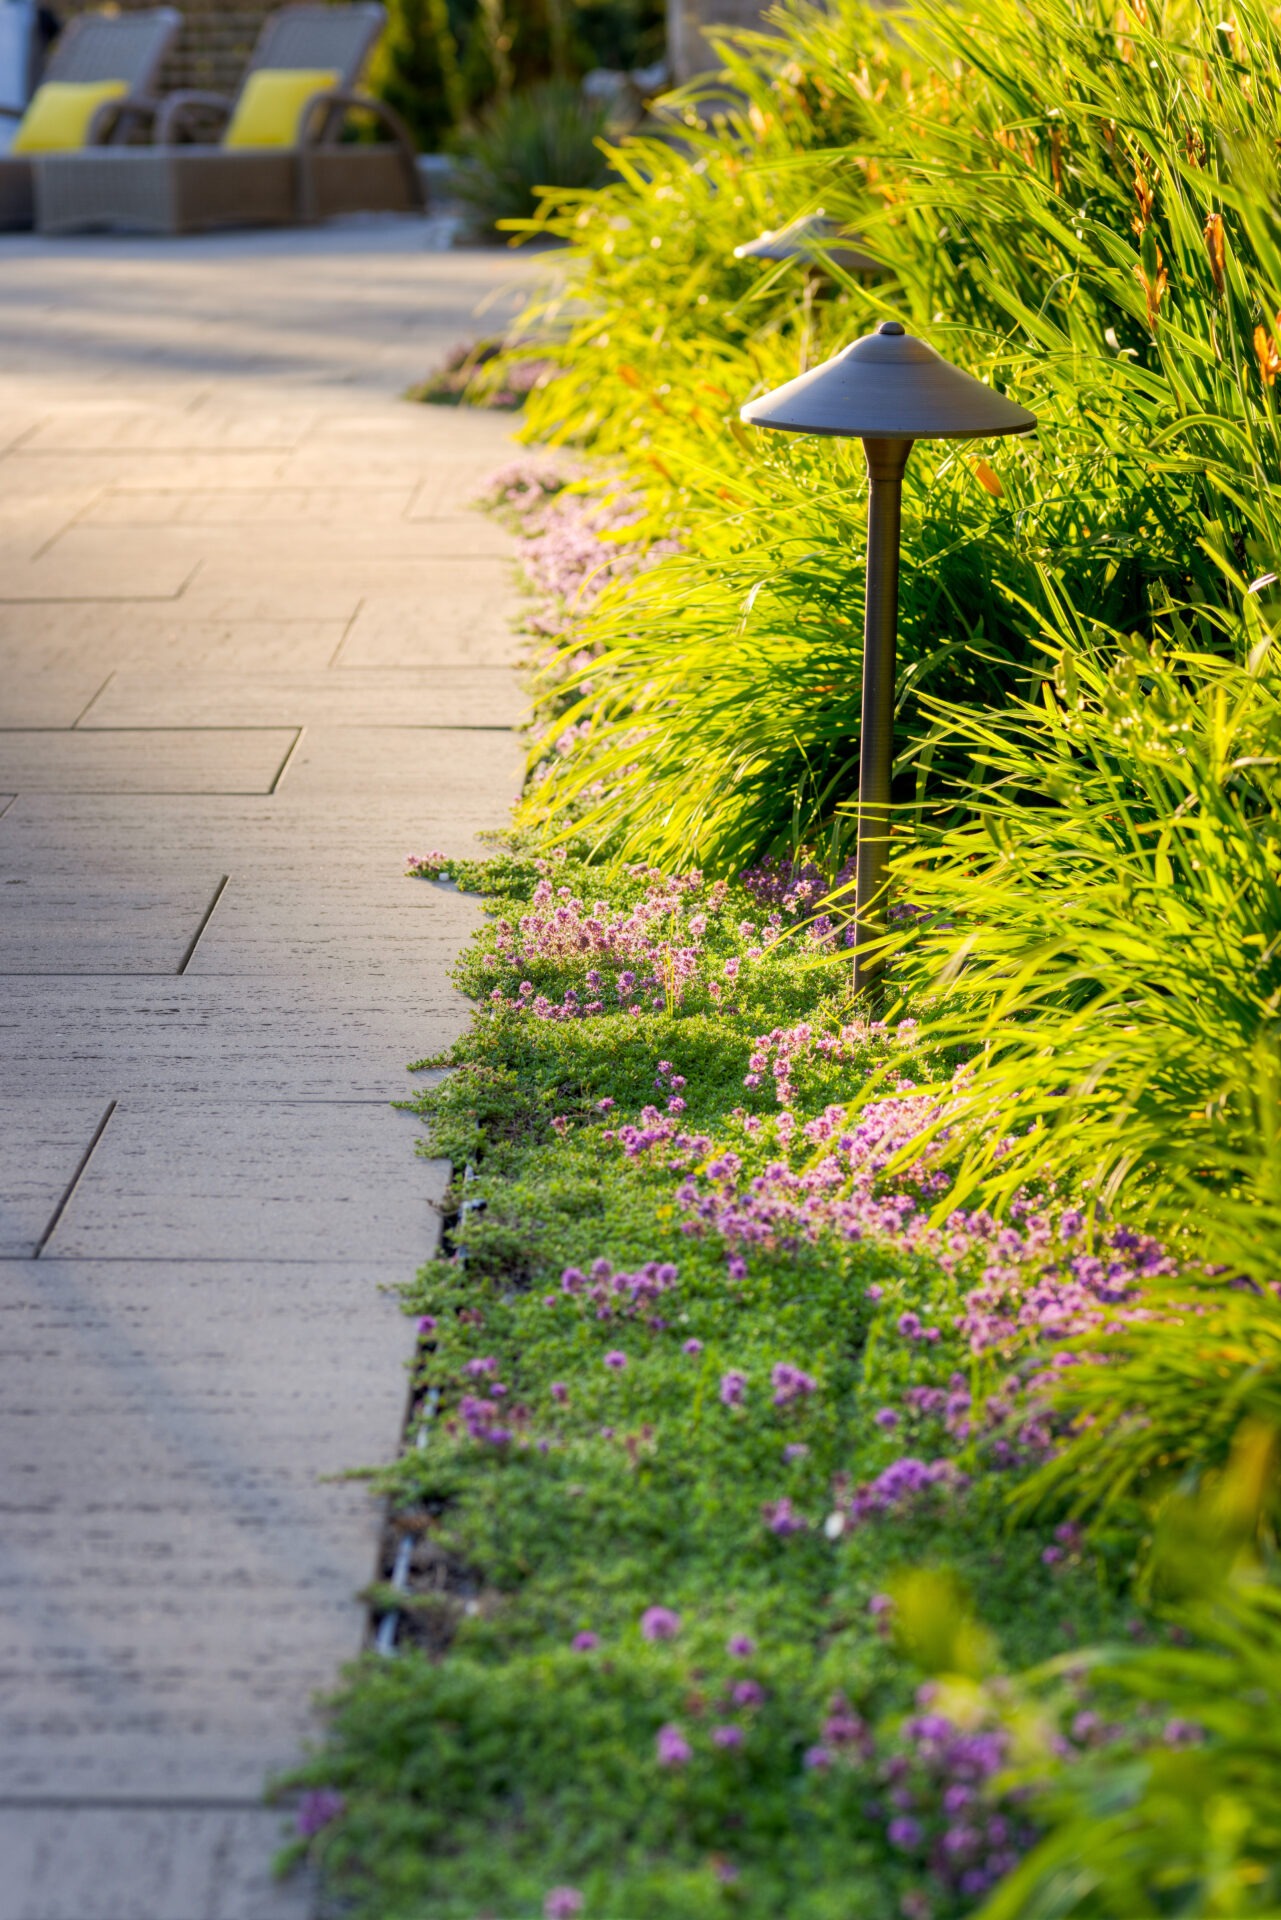 A serene garden pathway lined with lush grasses, small purple flowers, and modern outdoor lamps, leading to inviting lounge chairs in soft sunlight.